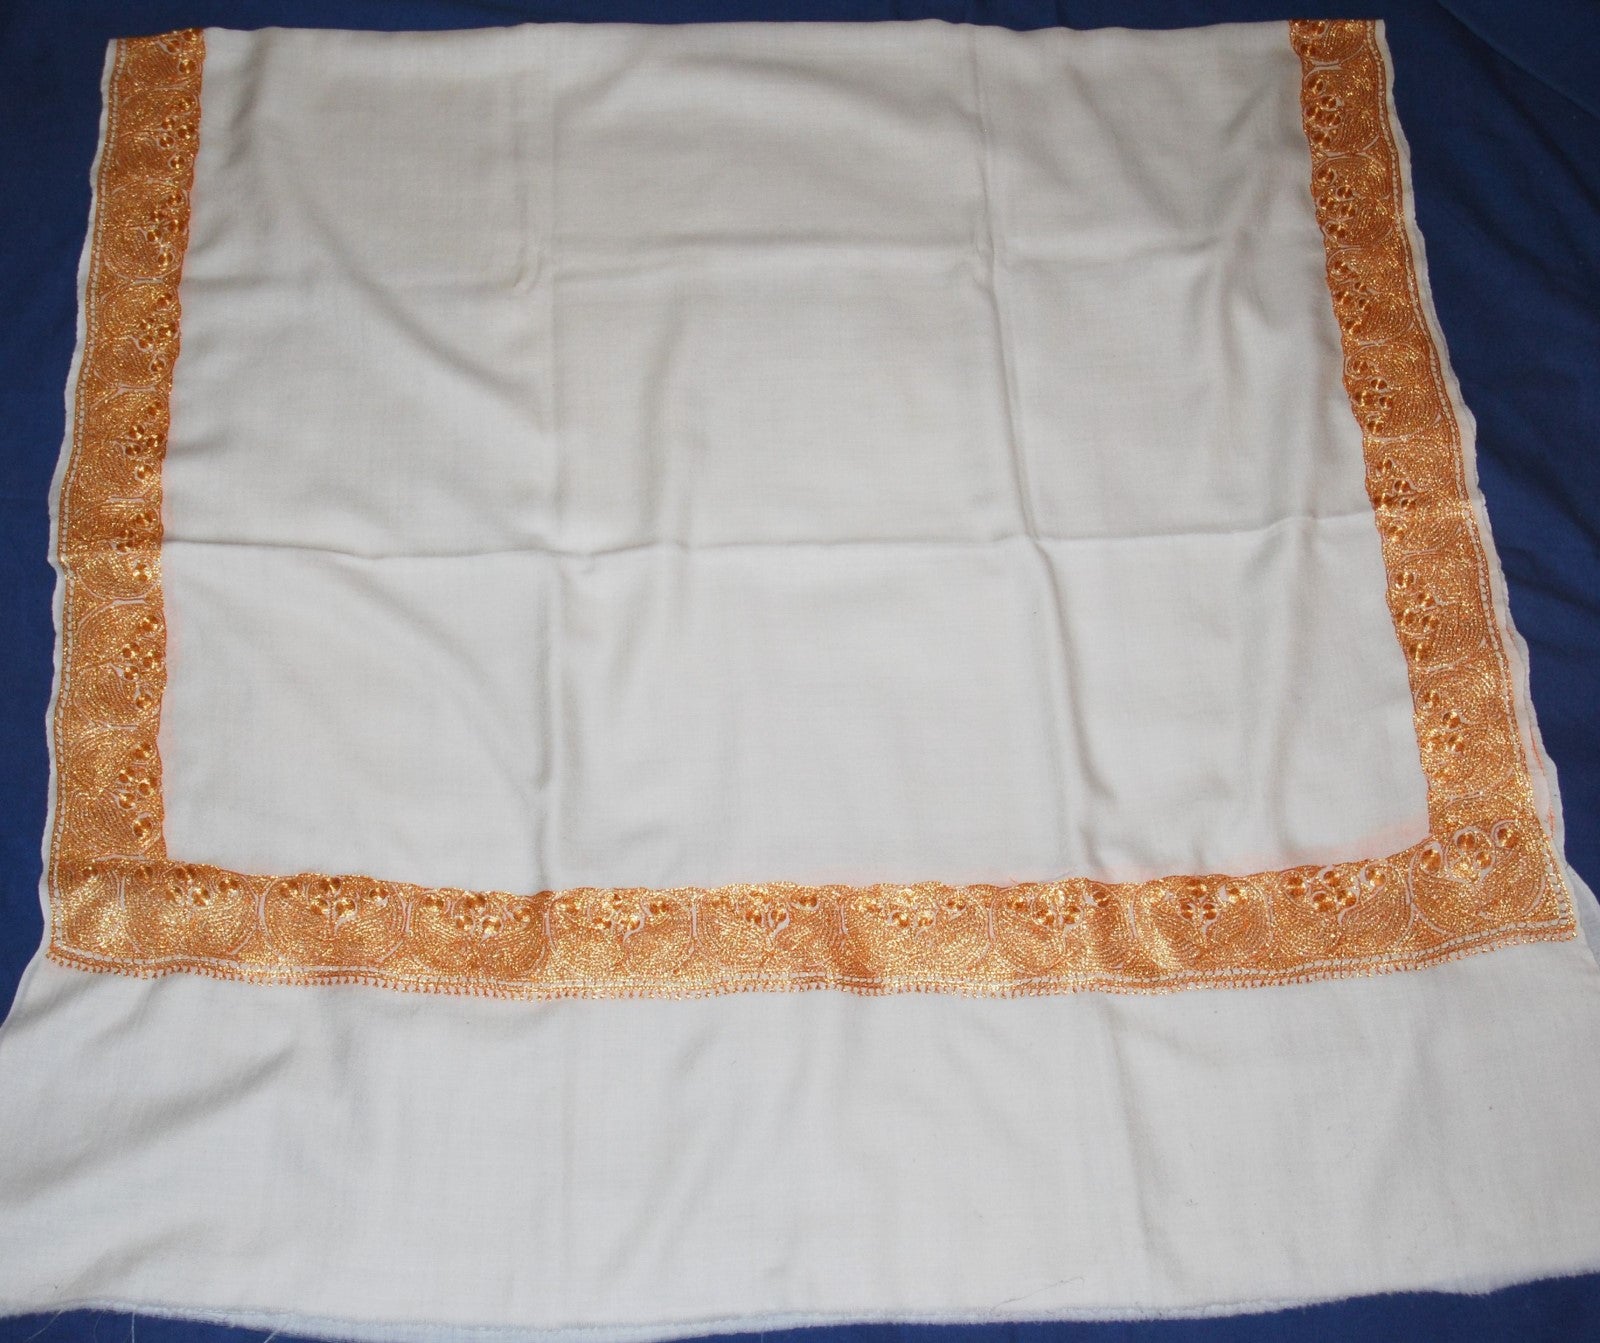 Embroidered Wool Shawl White, Gold "Tilla" Sozni Embroidery #WS-920